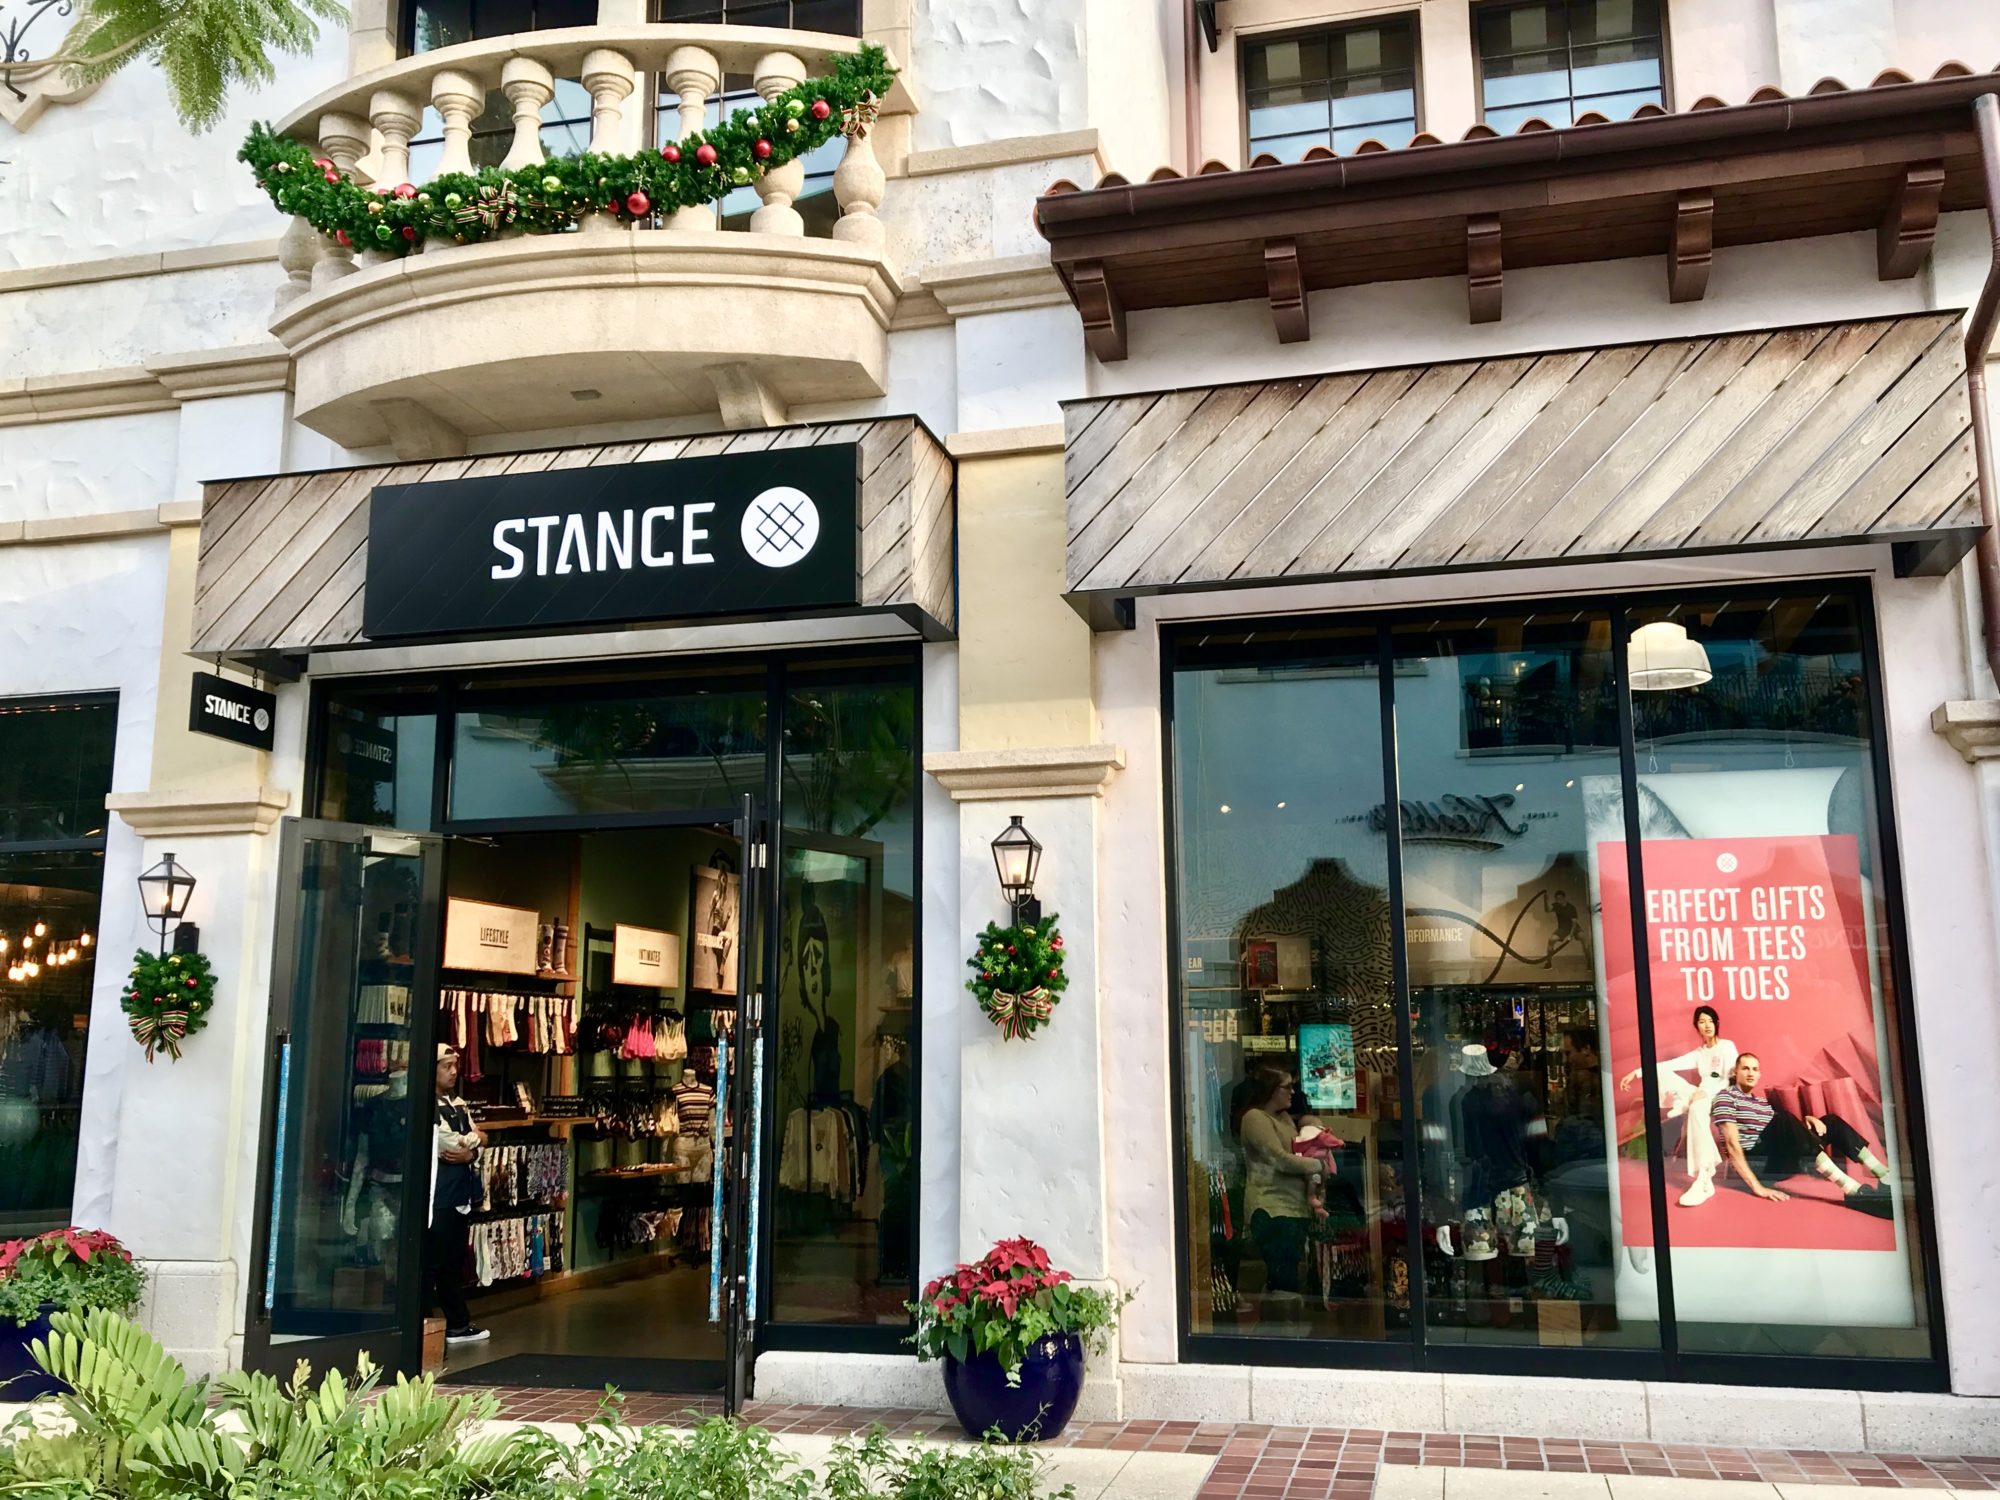 Stance: Step Up Your Disney Style – Disney Springs